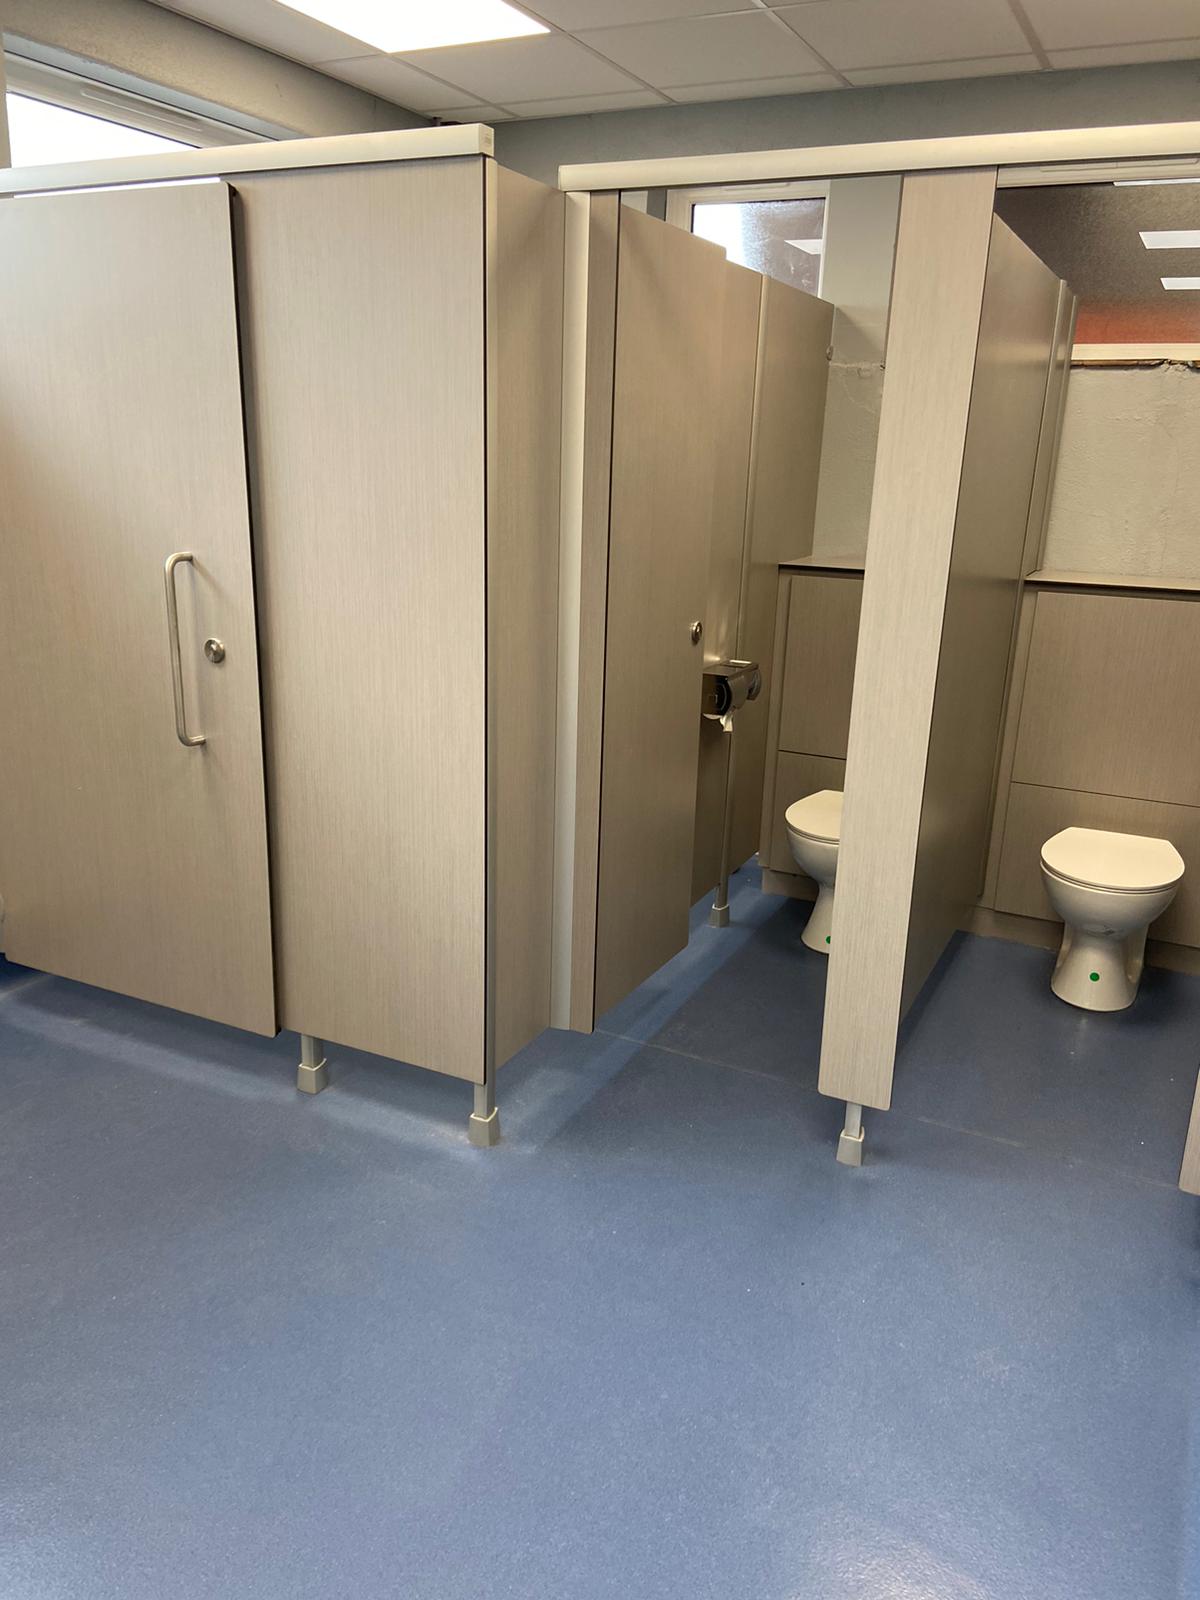 Toilet refurbishment completed by our Commercial/Industrial Division